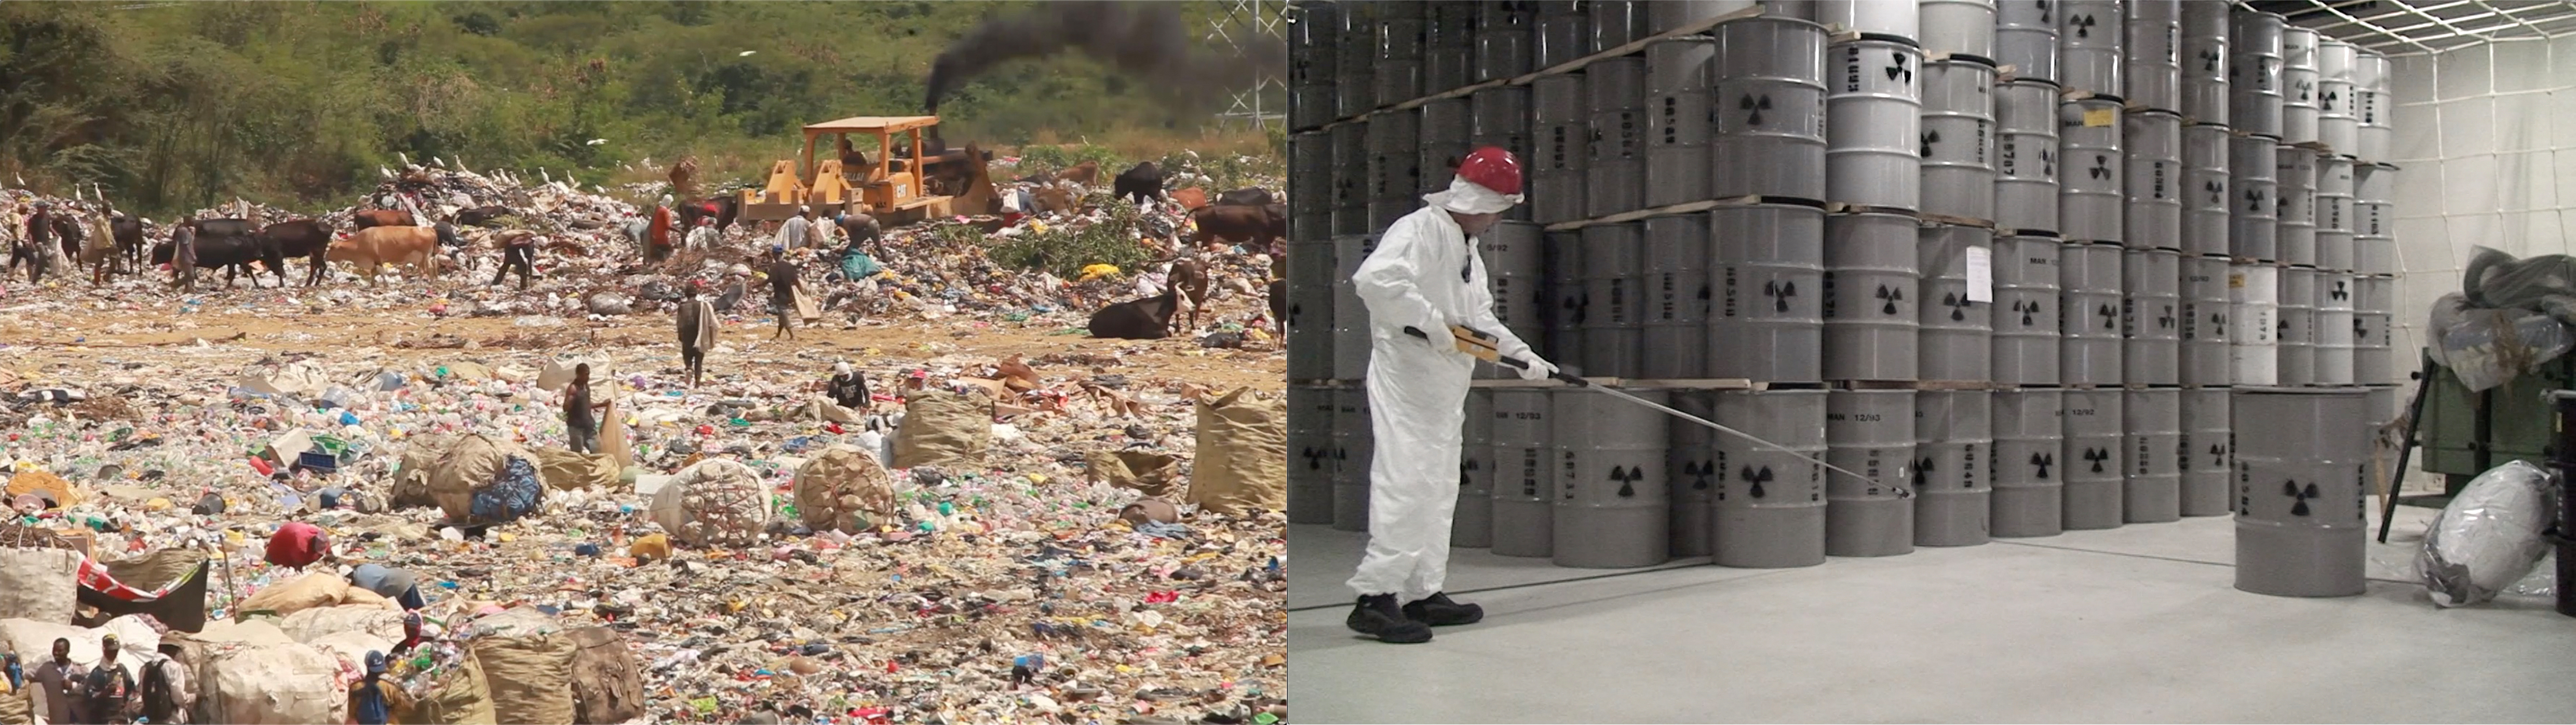 Two adjacent images, left: video still from video by Isabelle Carbonell and Duane Peterson showing a tip and recyclers. Right: still from video by Armin Linke showing a nuclear waste storage facility